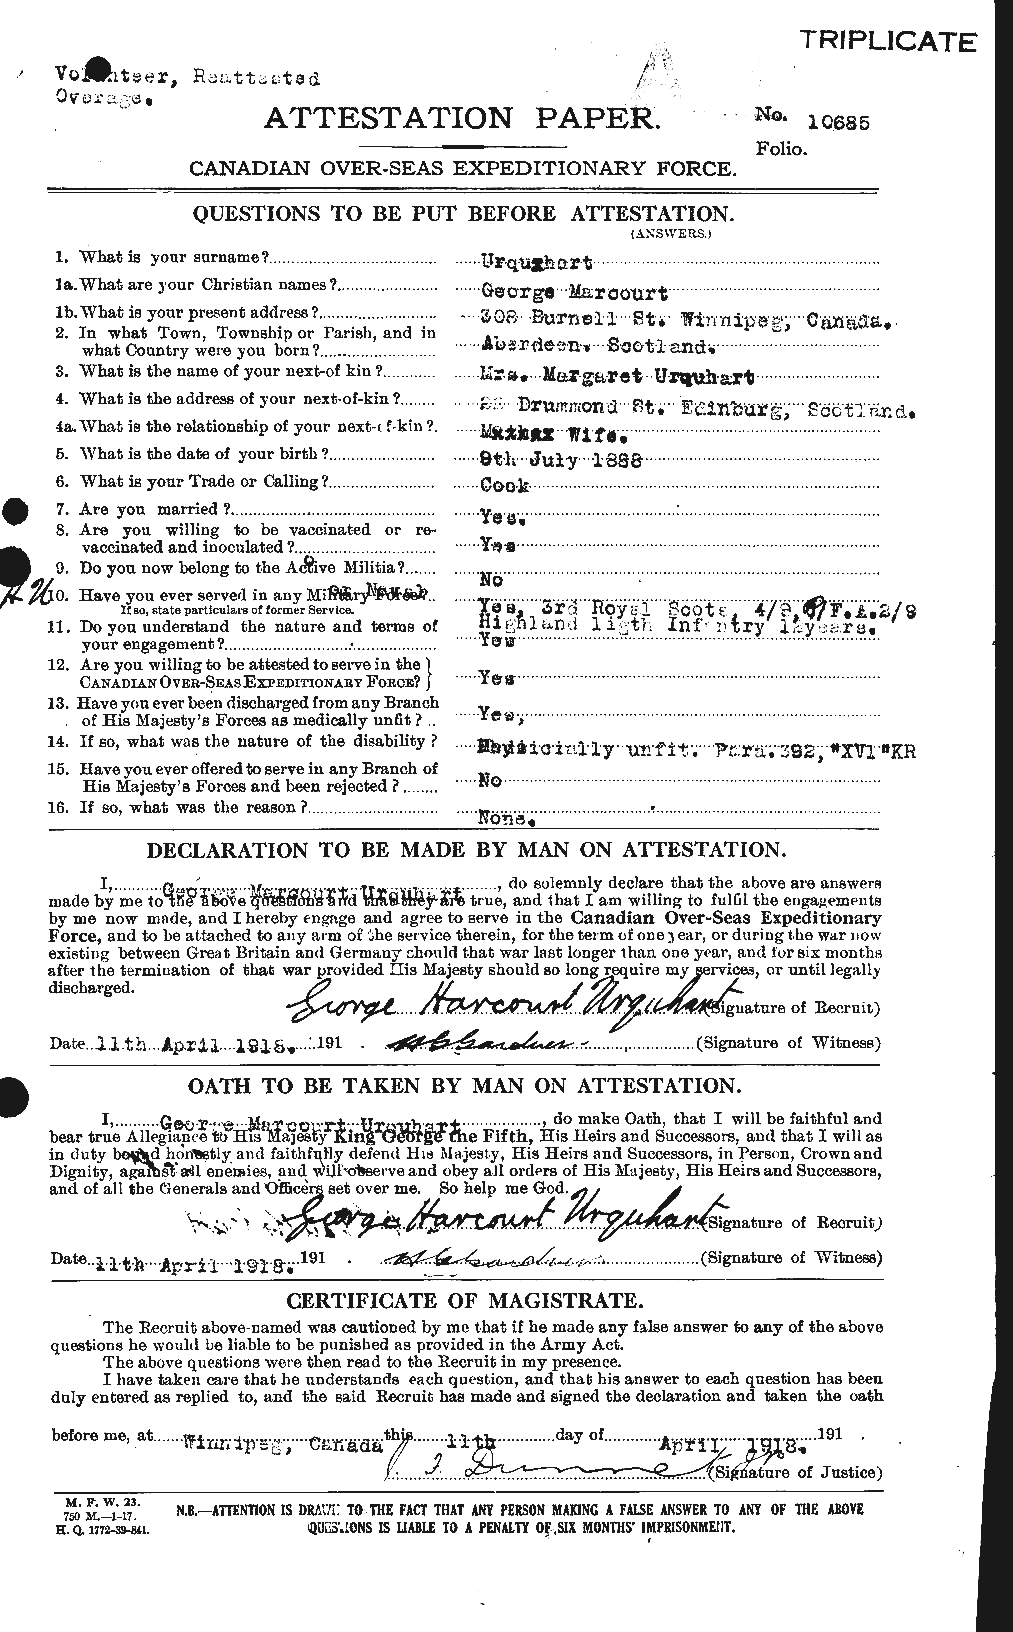 Personnel Records of the First World War - CEF 643332a